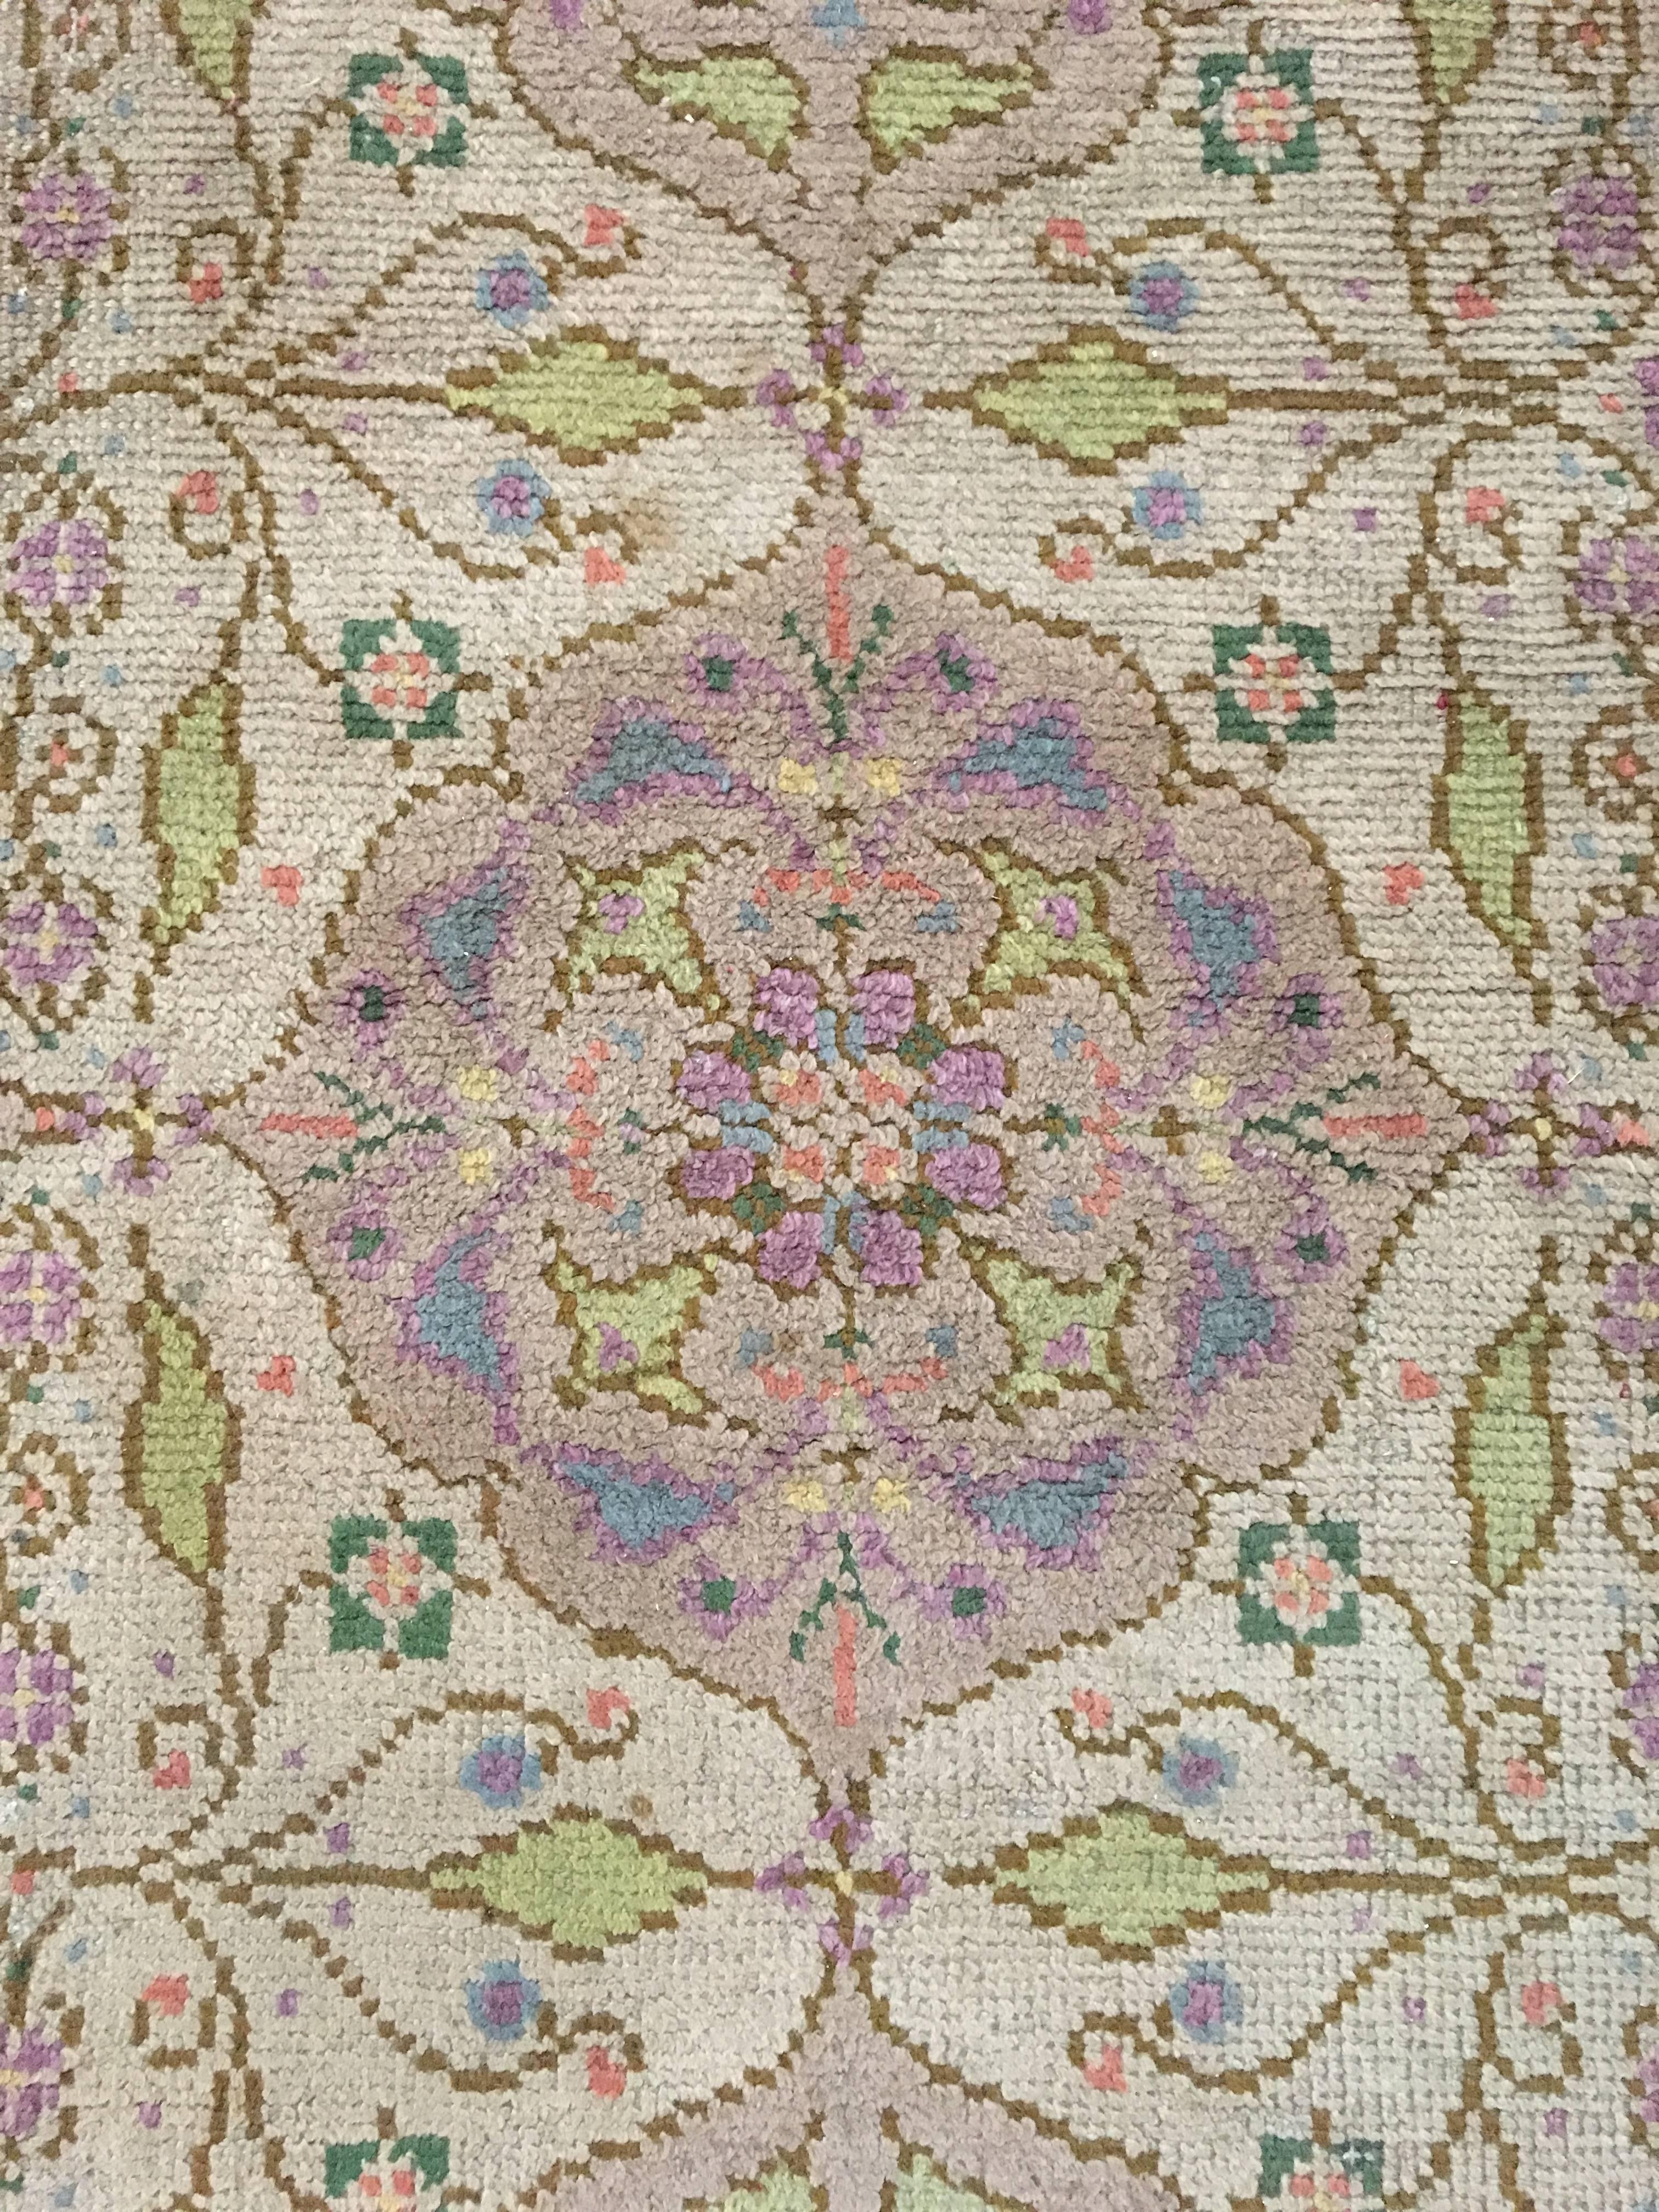 Art Nouveau Hand Knotted Carpet with Floral Design, Theo Nieuwenhuis, 1890-1905 In Fair Condition For Sale In Schagen, NL